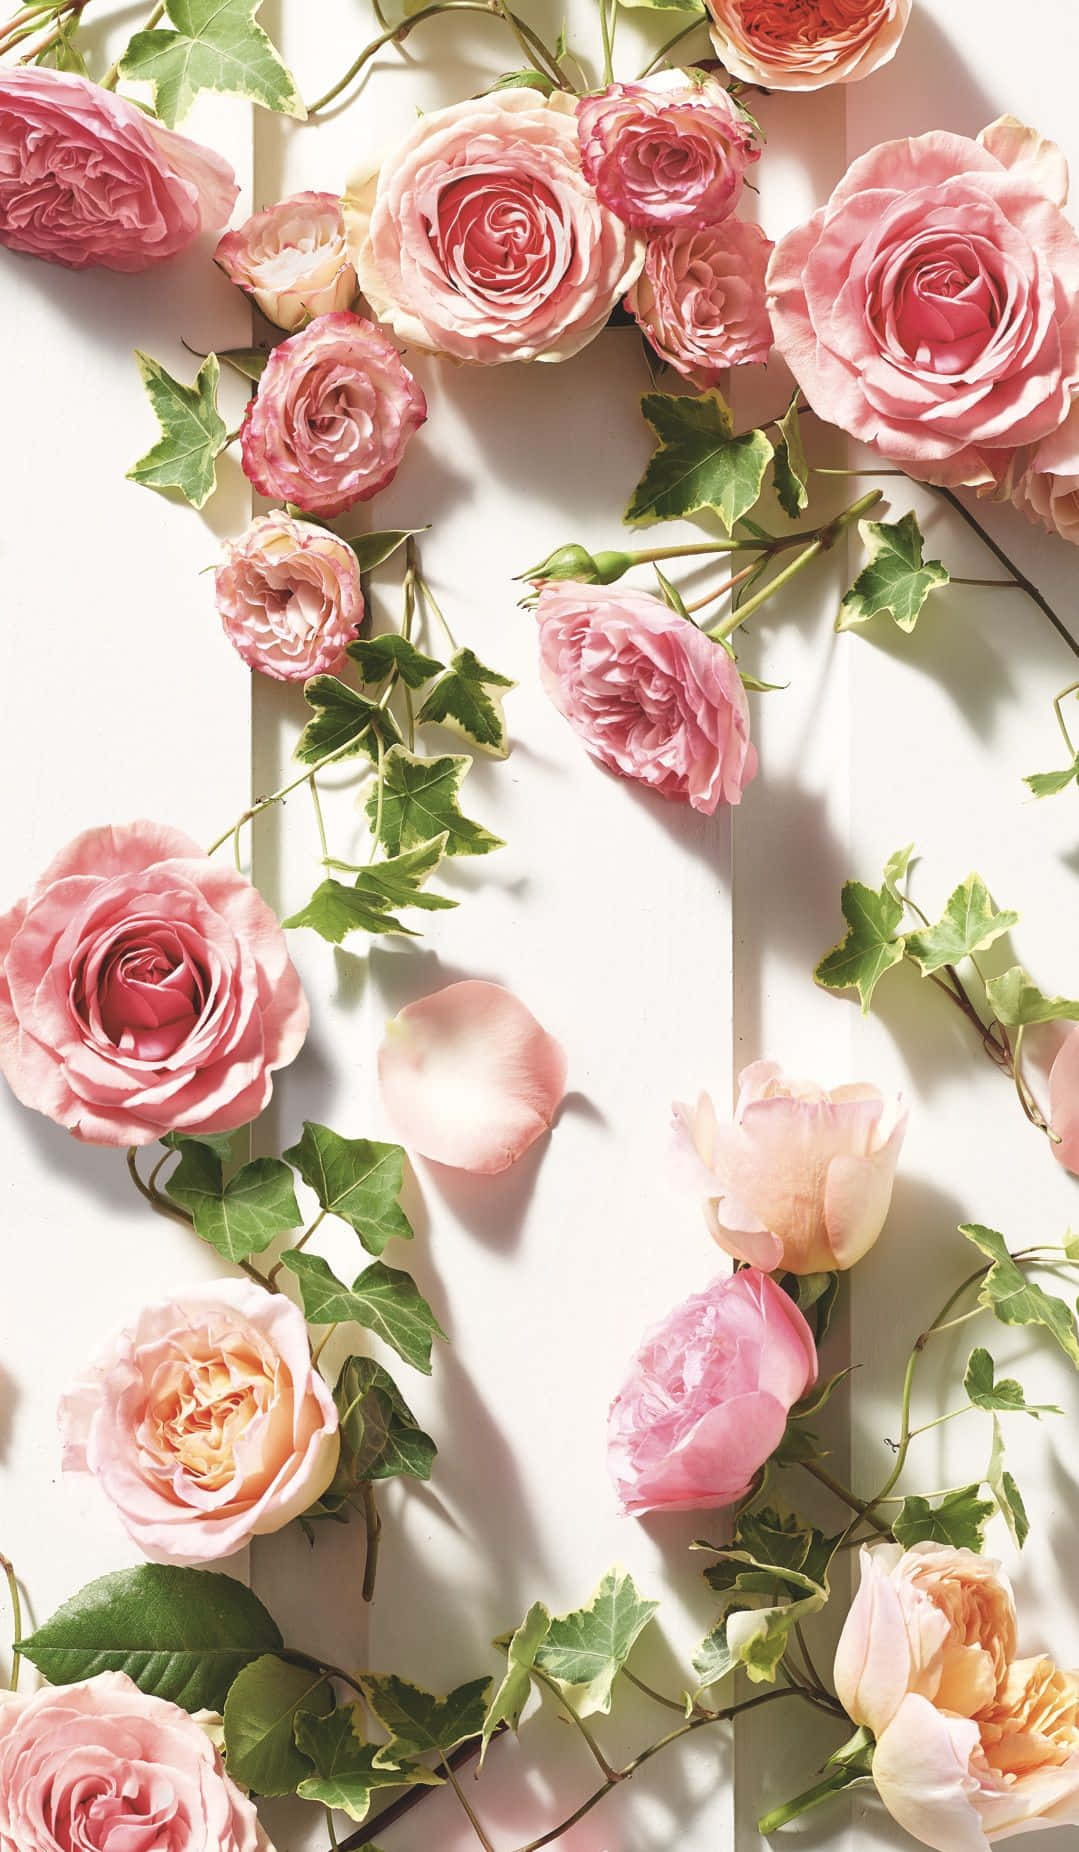 Iphone X Peach And Pink Roses Background